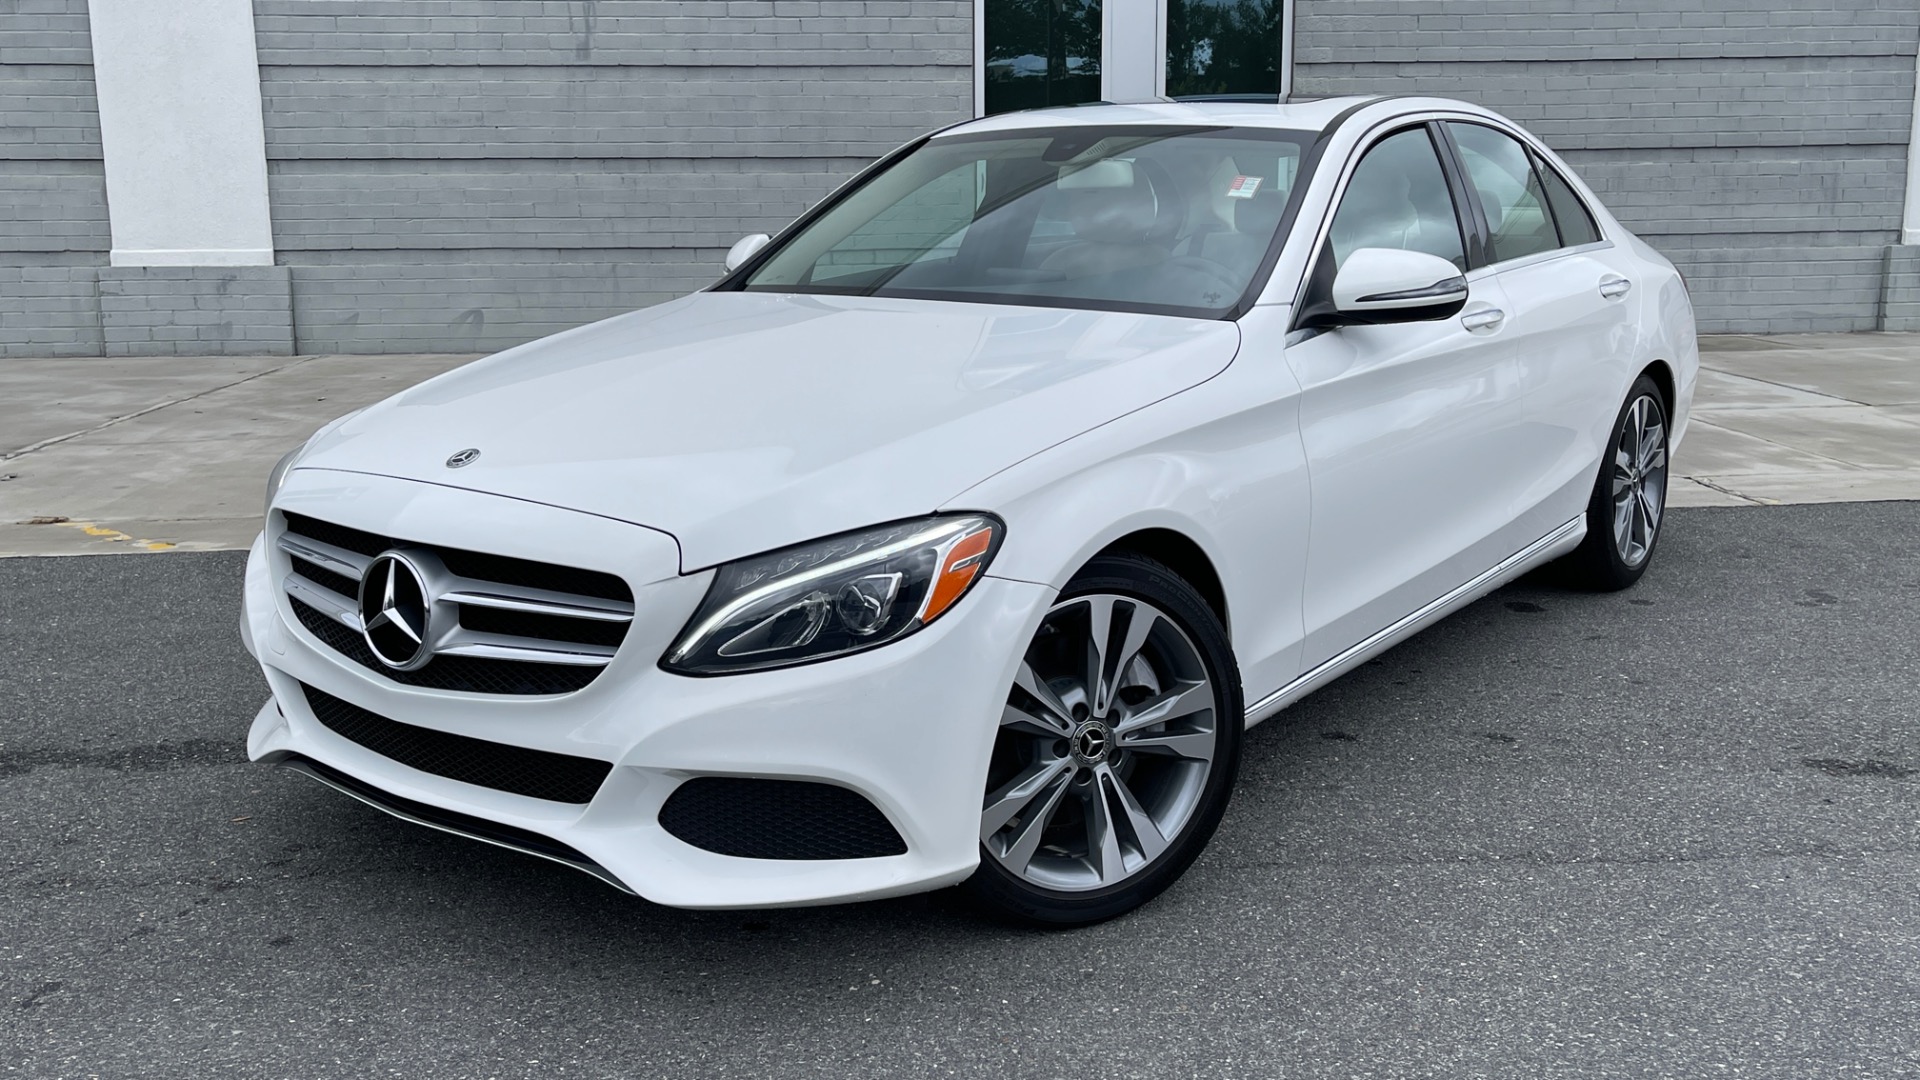 Used 2018 Mercedes-Benz C-Class C 300 / PREMIUM PACKAGE / 18IN WHEELS / HEATED FRONT SEATS / LED HEADLIGHTS for sale $27,495 at Formula Imports in Charlotte NC 28227 1